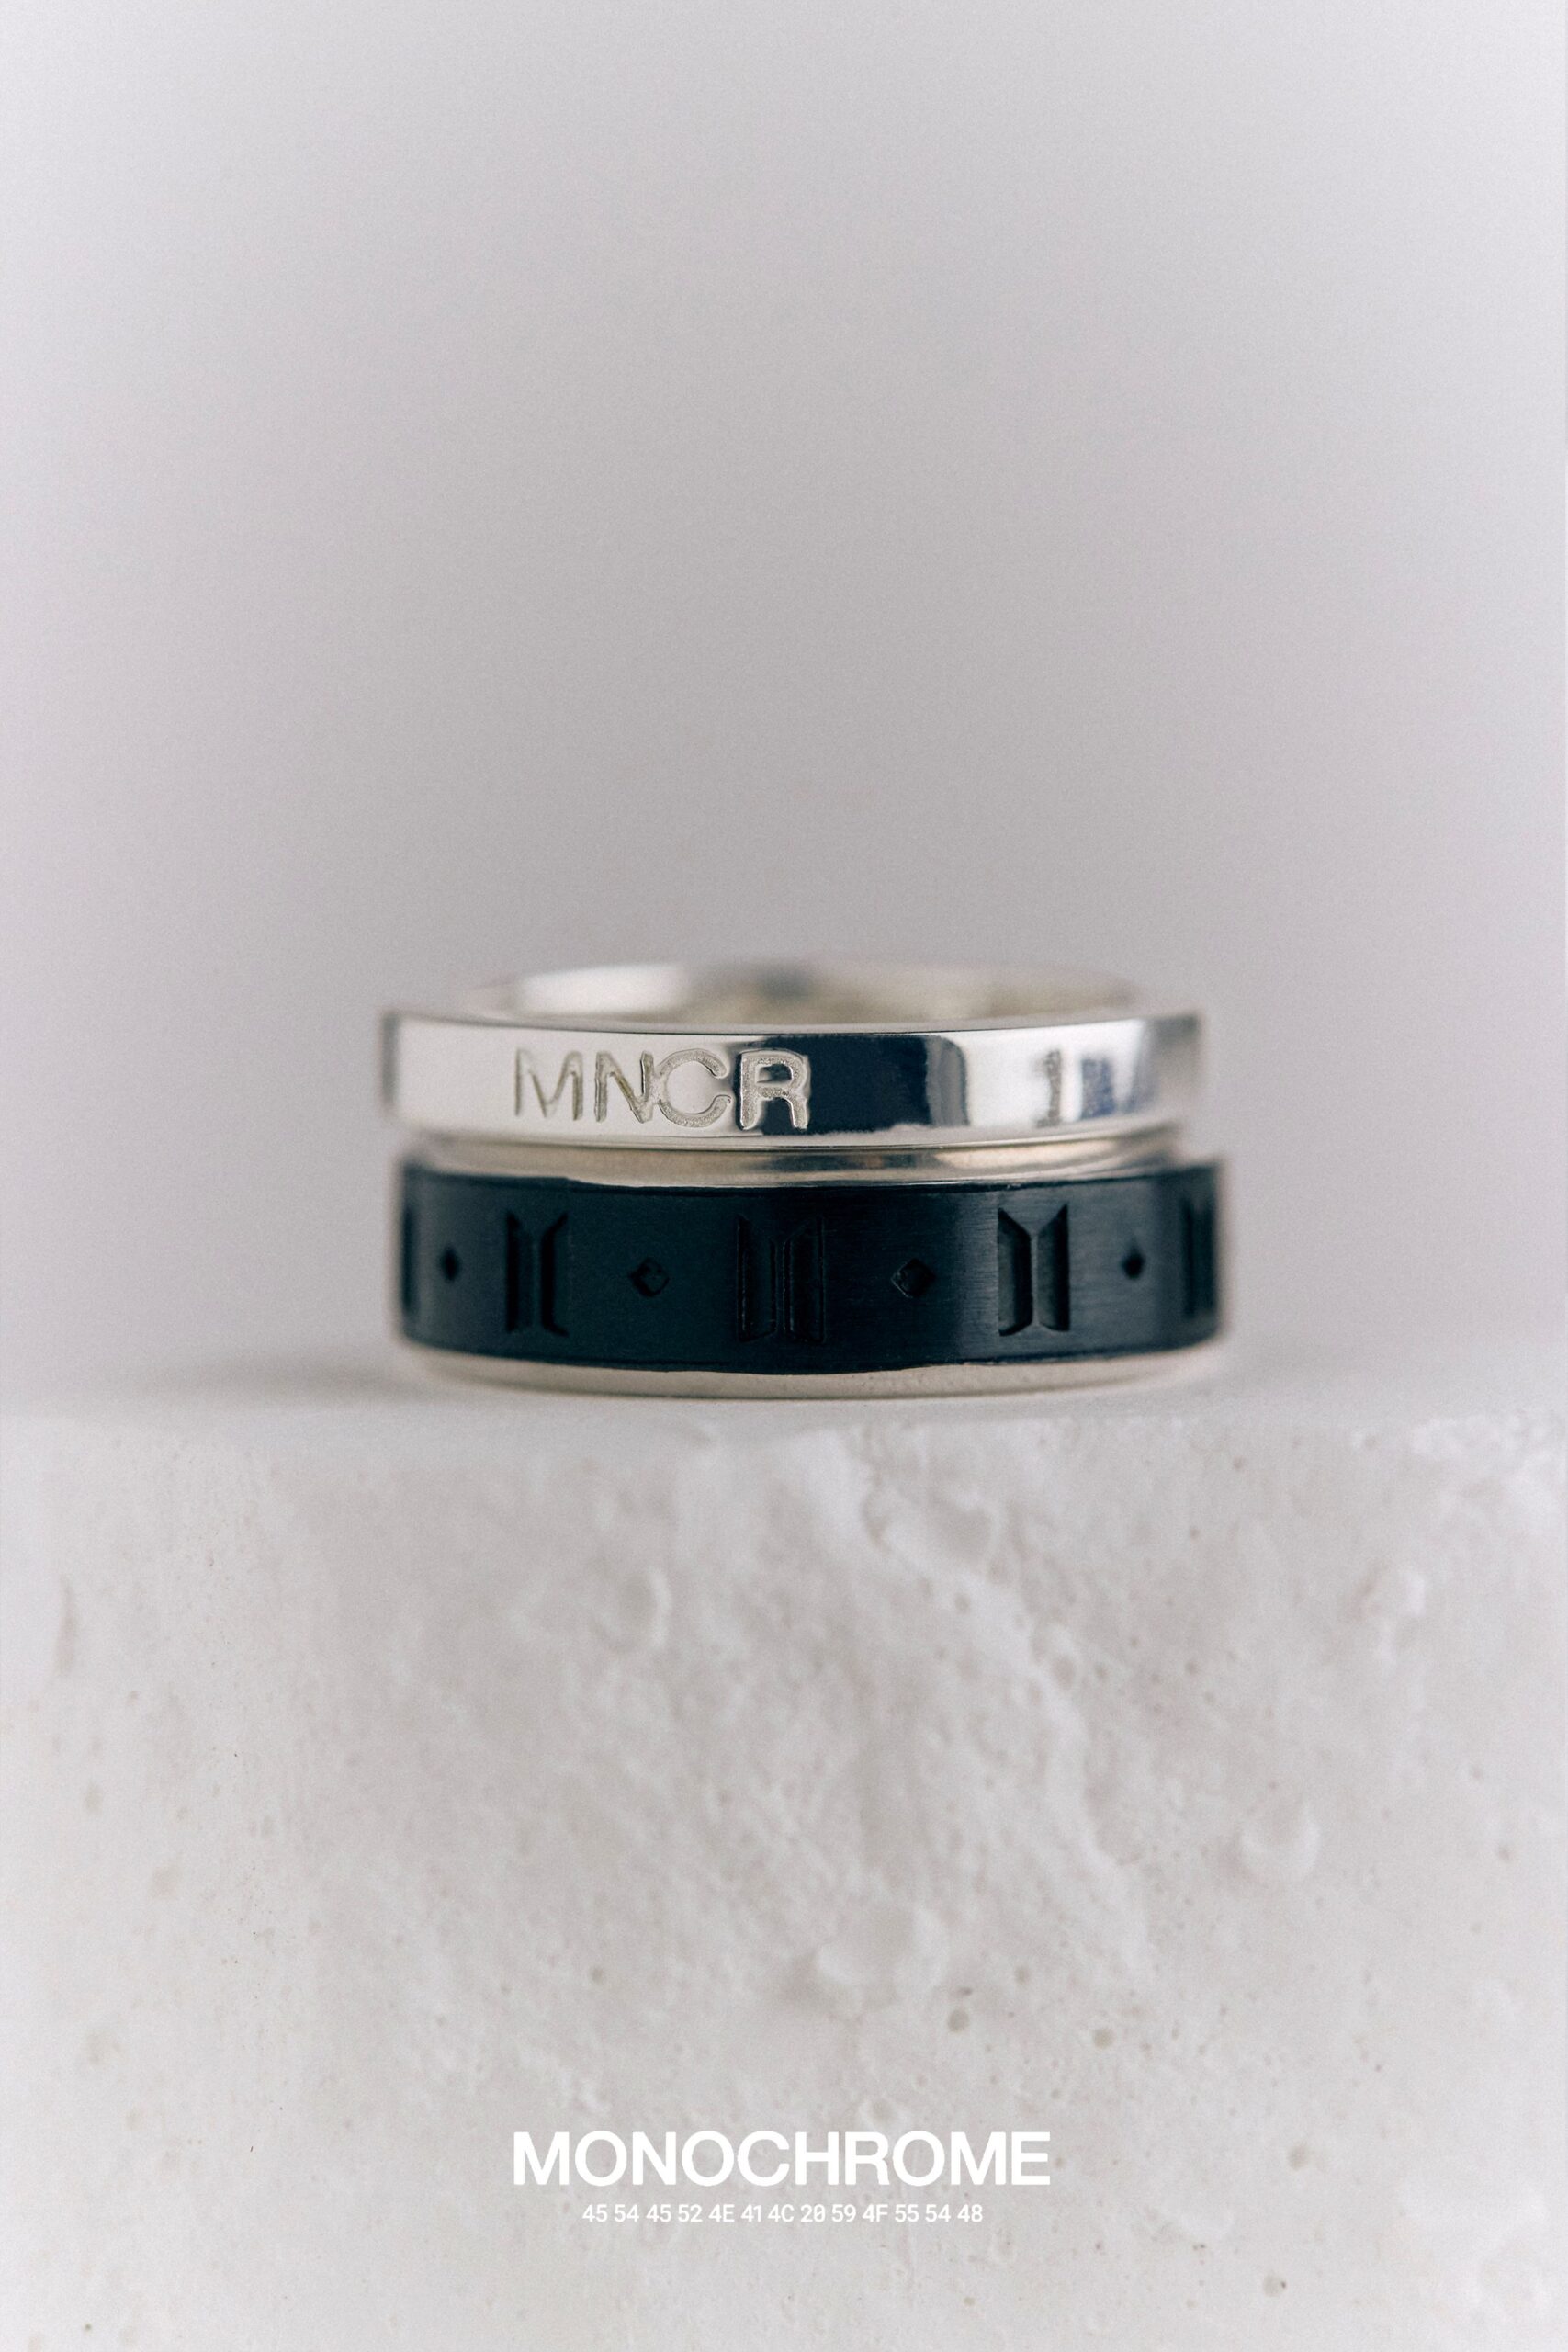 A ring from BTS' Monochrome pop-up shop